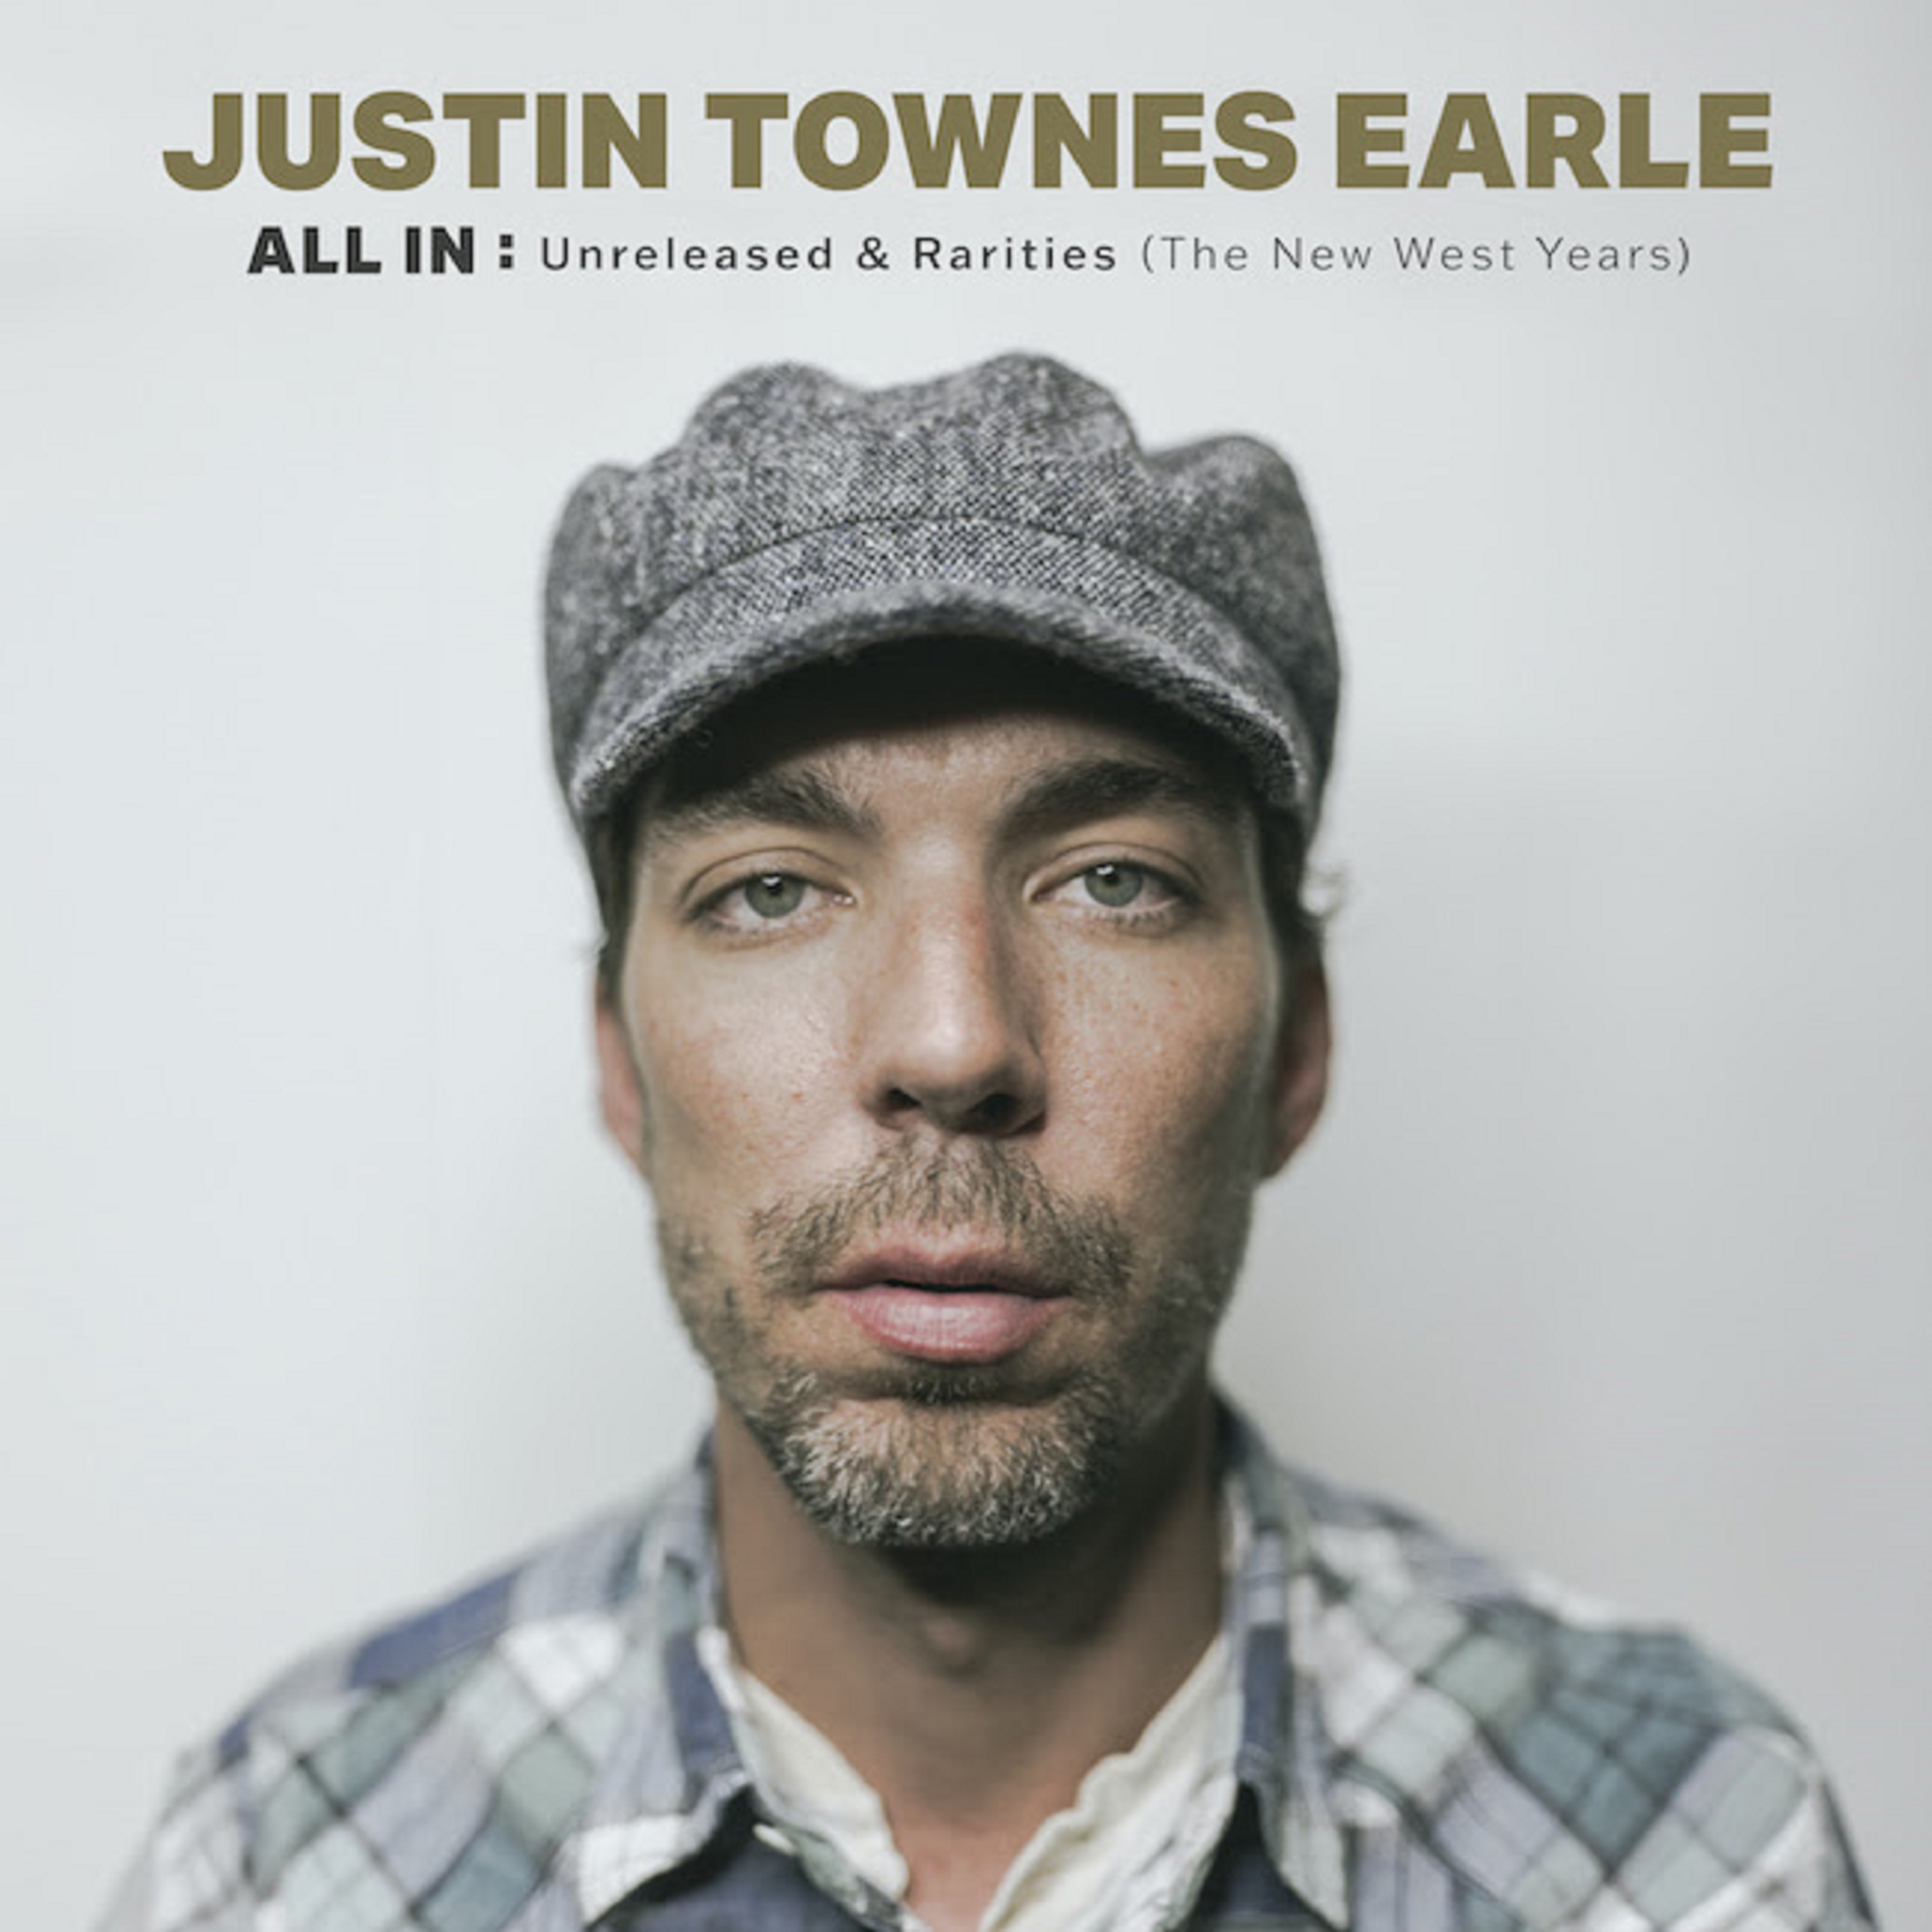 Justin Townes Earle "ALL IN: Unreleased & Rarities (The New West Years)" To Be Released August 9